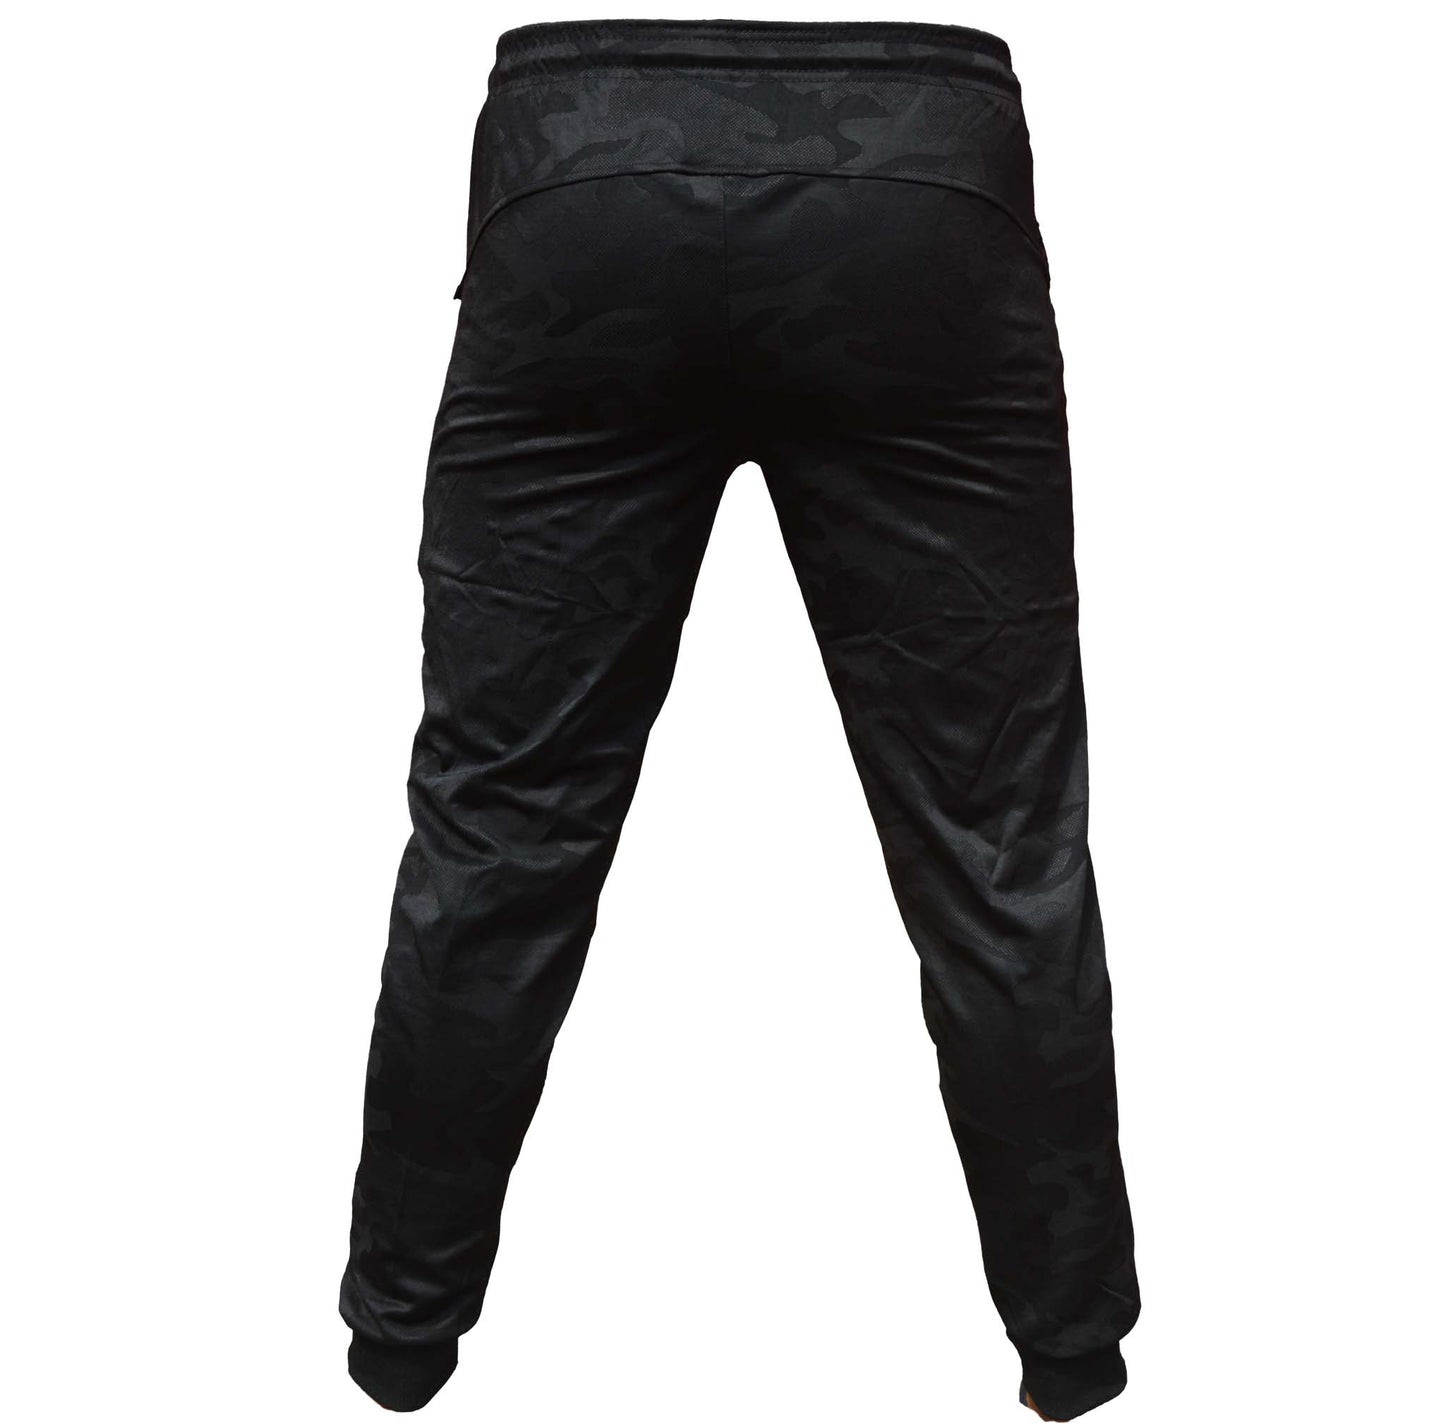 China Hoodie & Trouser Combo Offer